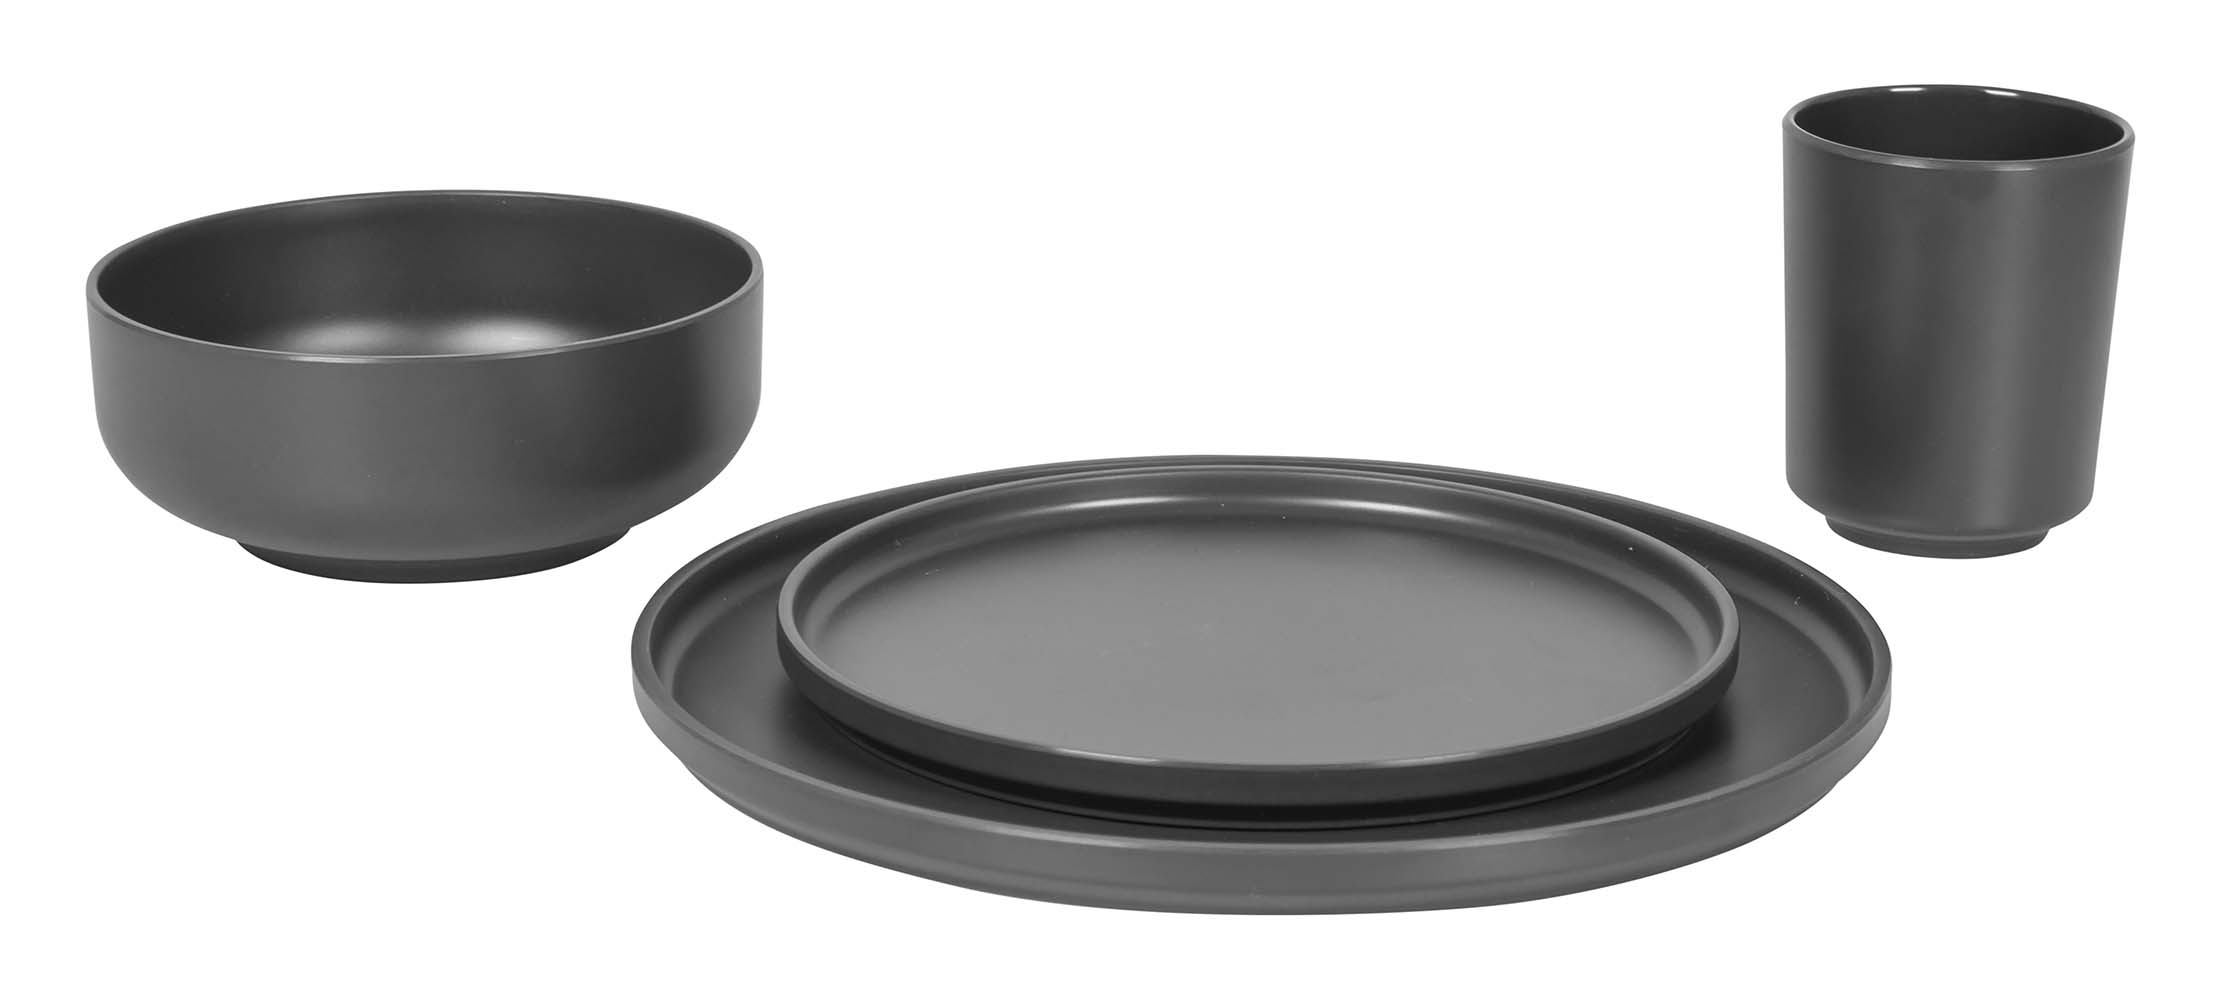 Bo-Camp - Industrial collection - Tableware - Patom - Melamine - 16 Pieces - Anthracite detail 3